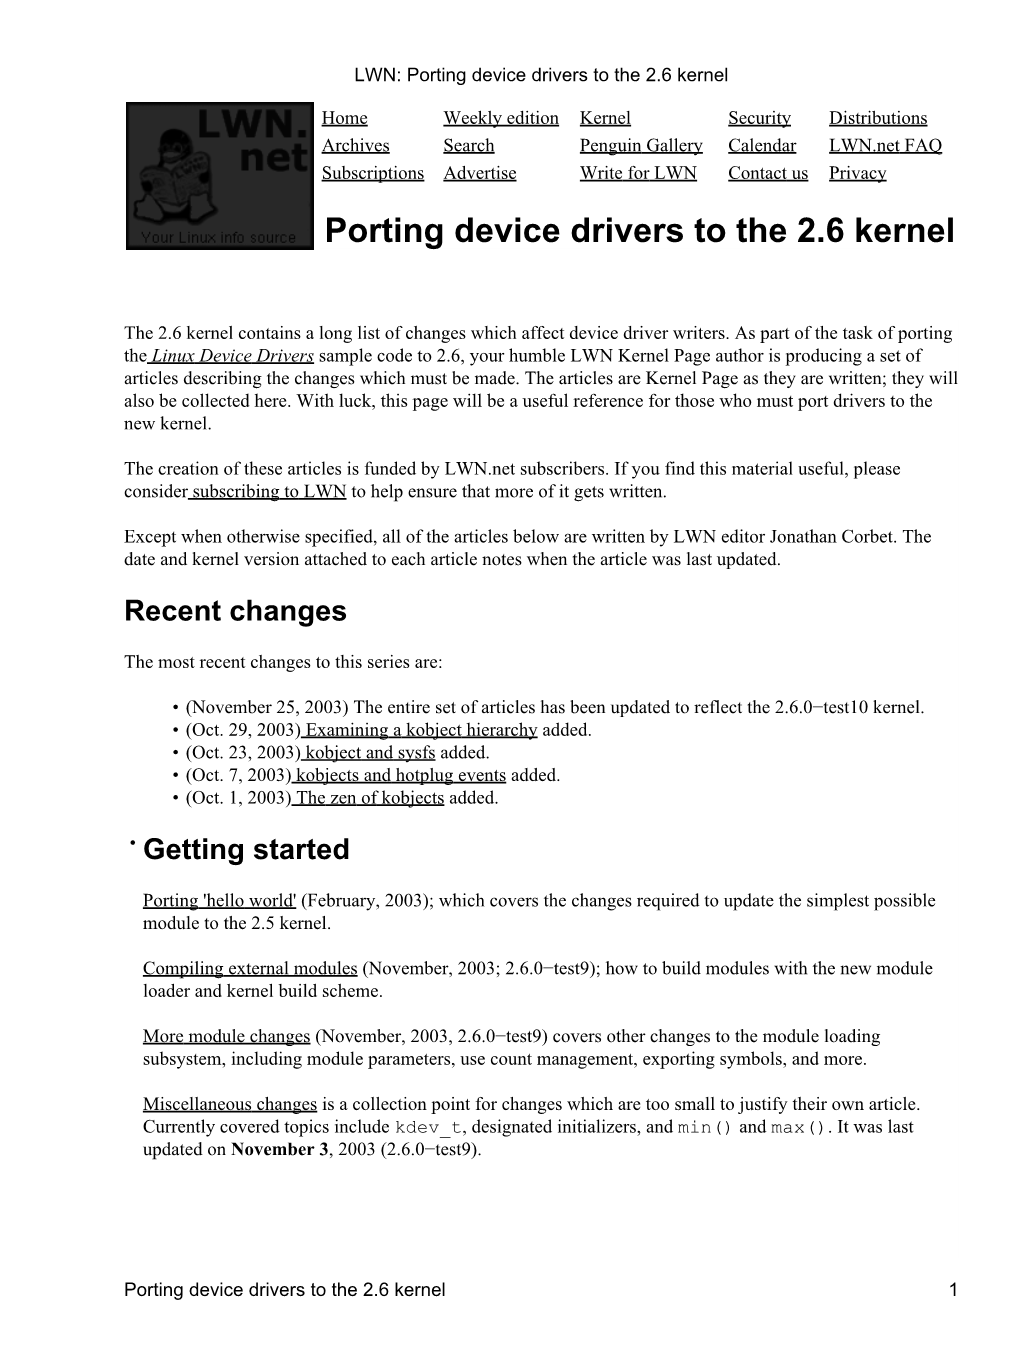 LWN: Porting Device Drivers to the 2.6 Kernel